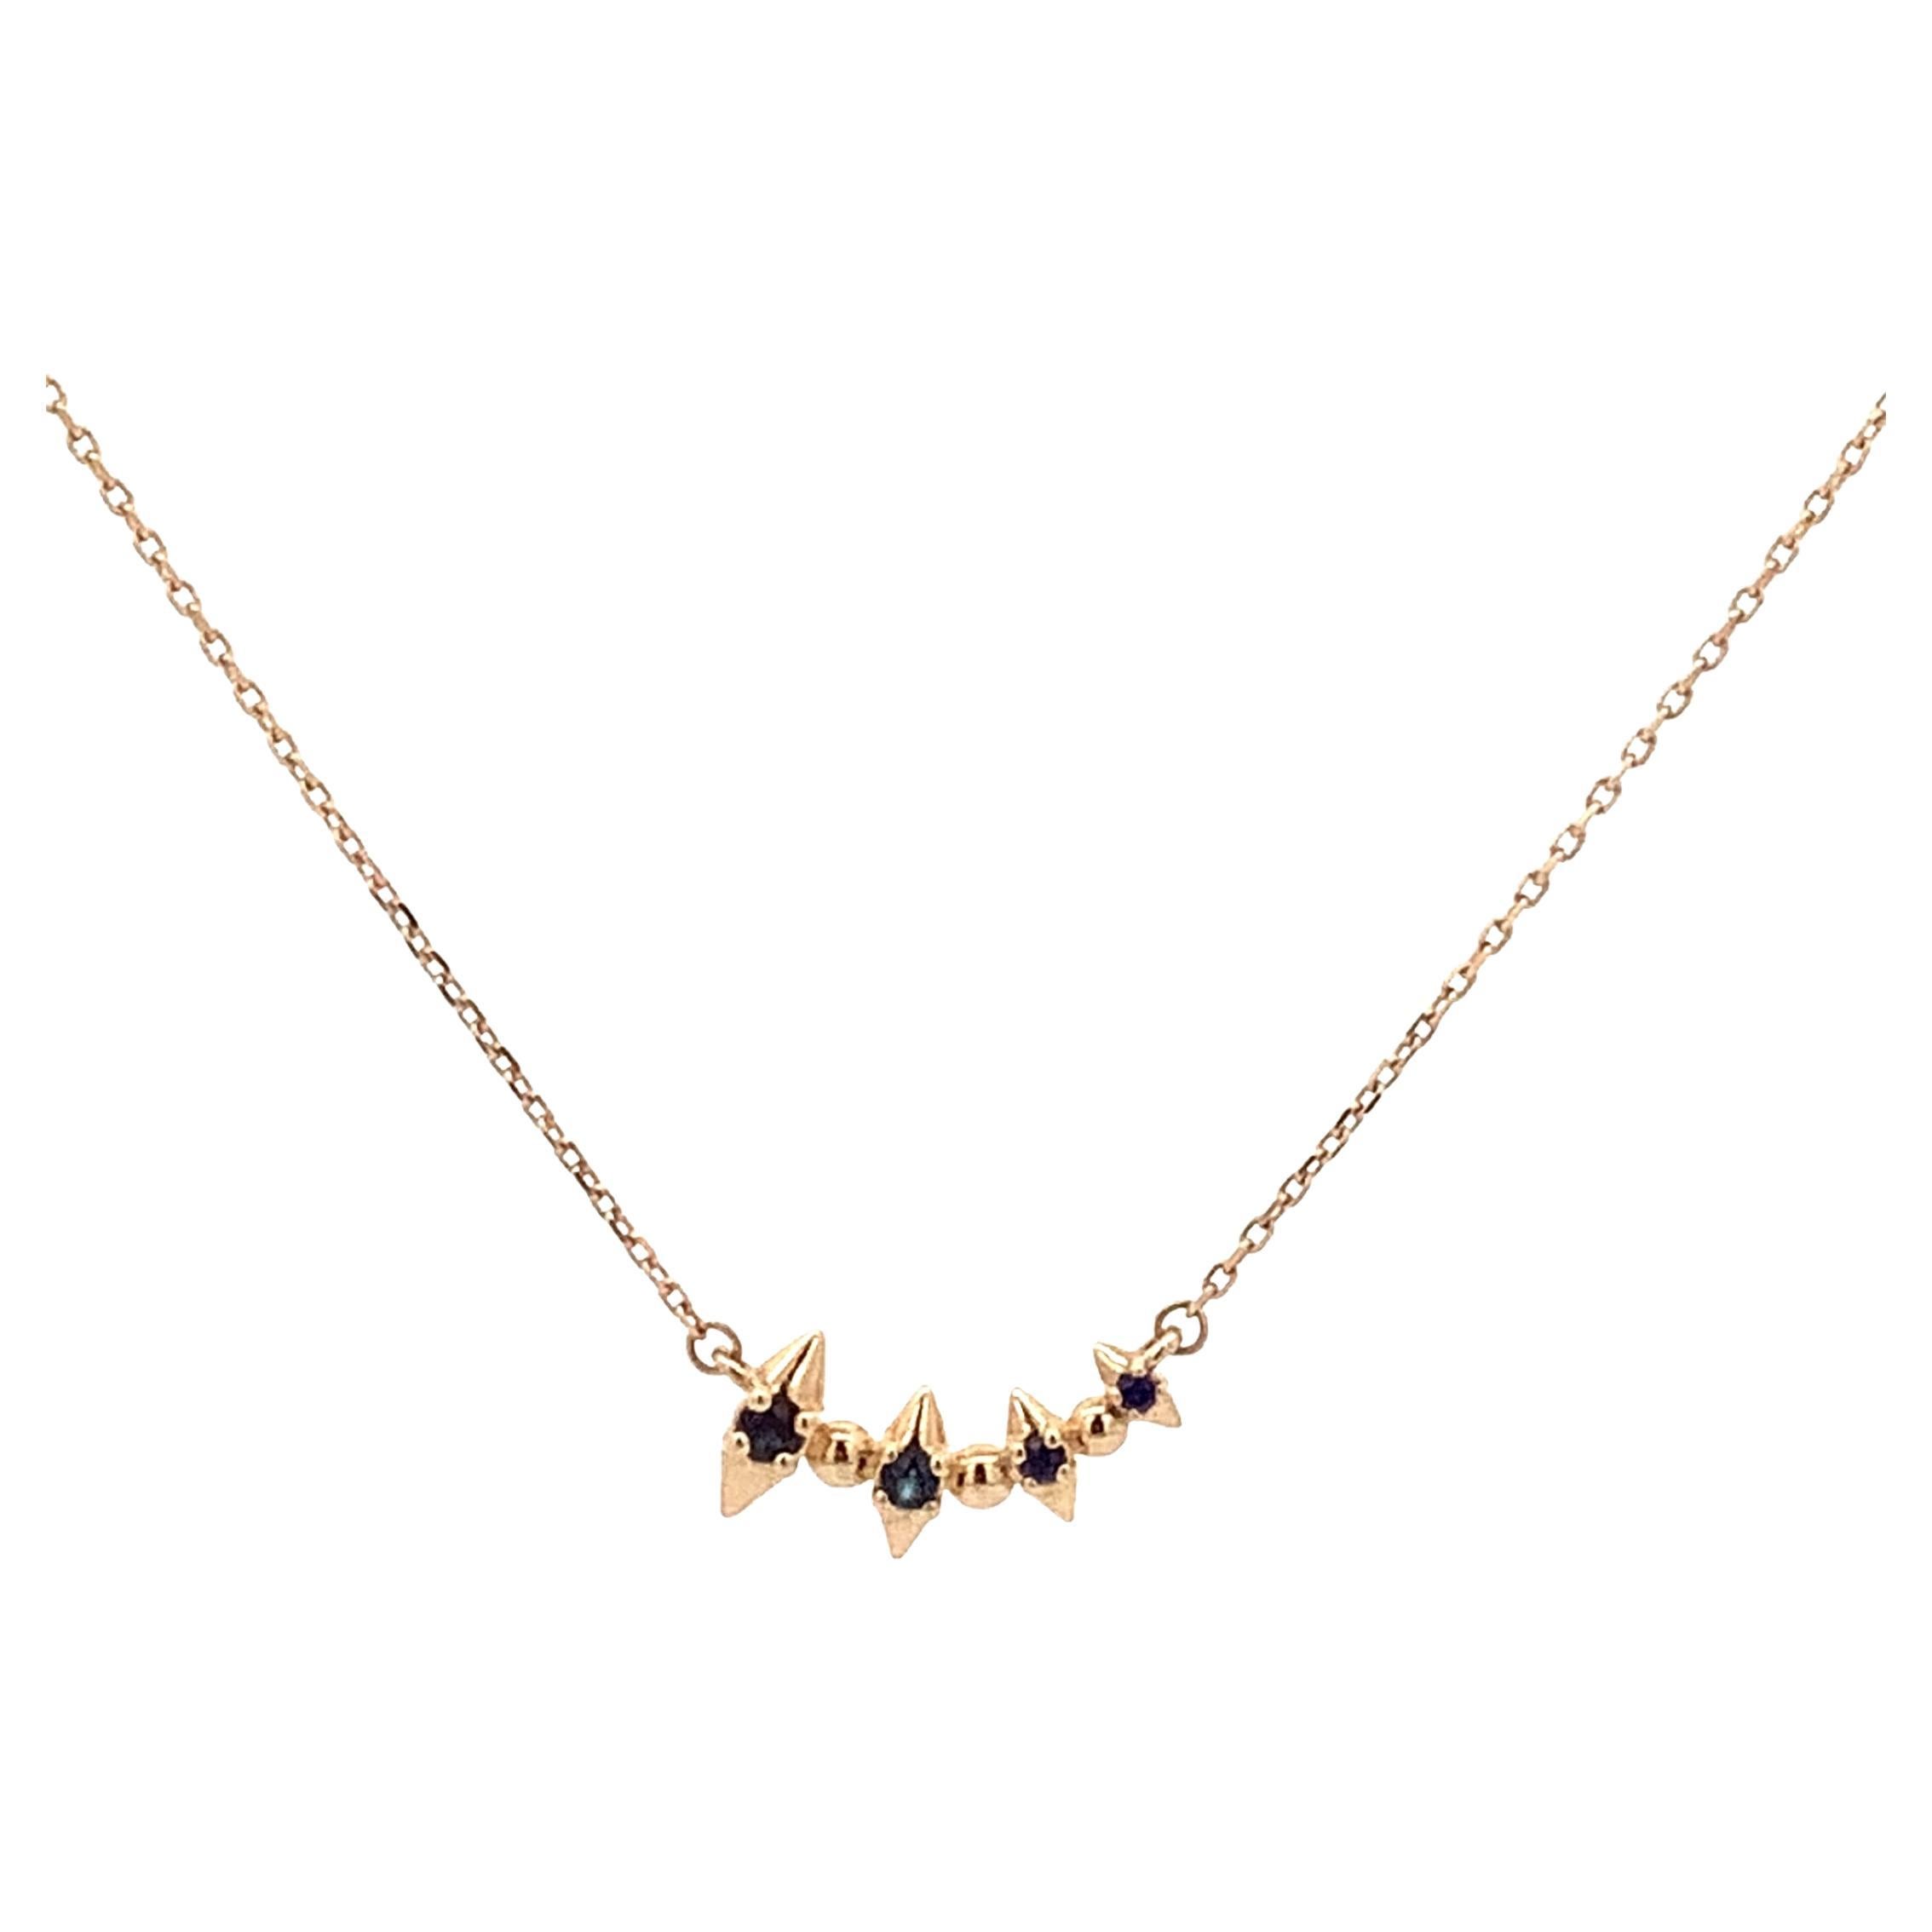 Adina Reyter One of a Kind Sapphire Spike Curve Necklace - Y14

14k yellow gold necklace with 4 spikes with round prong-set sapphires. The curve measures 13.5mm. Features a dainty, adjustable 14/15/16